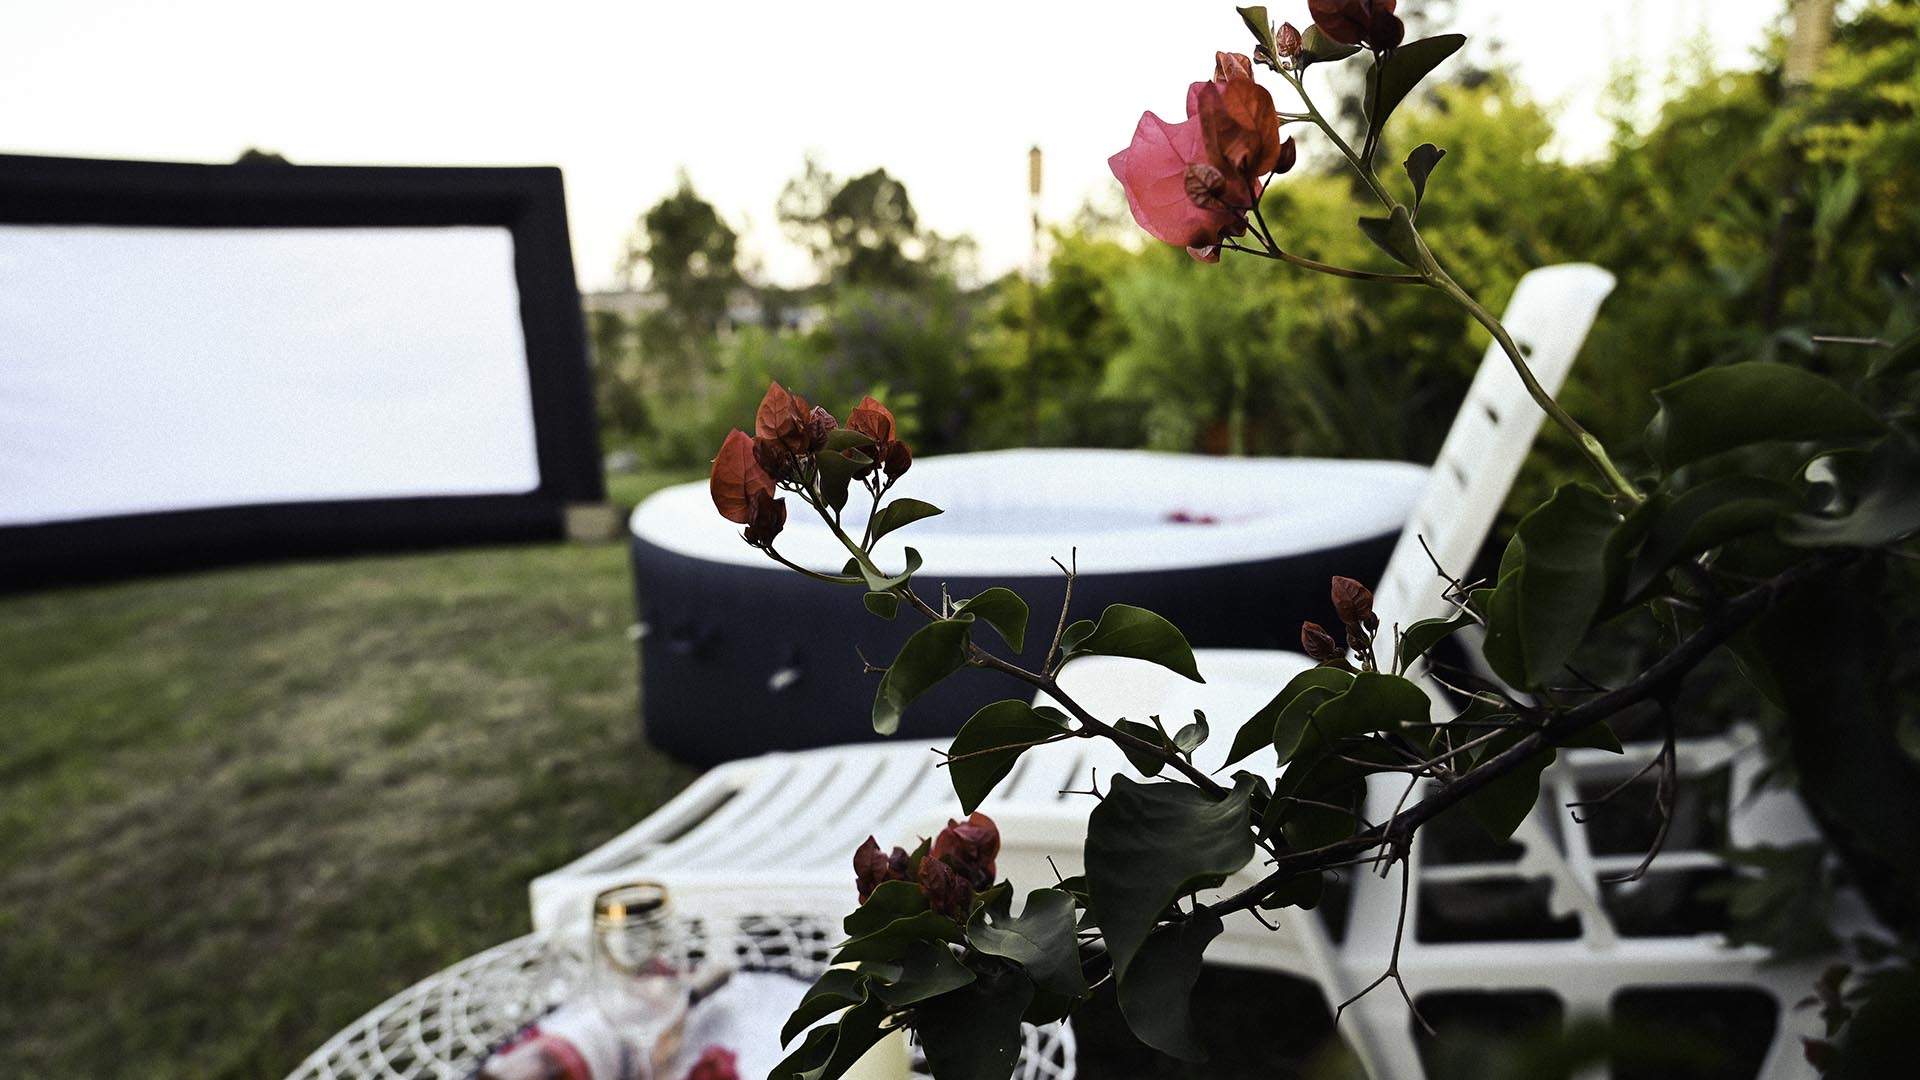 Brisbane's New Hot Tub Cinema Experience Lets You Soak and Watch Movies in Your Own Backyard